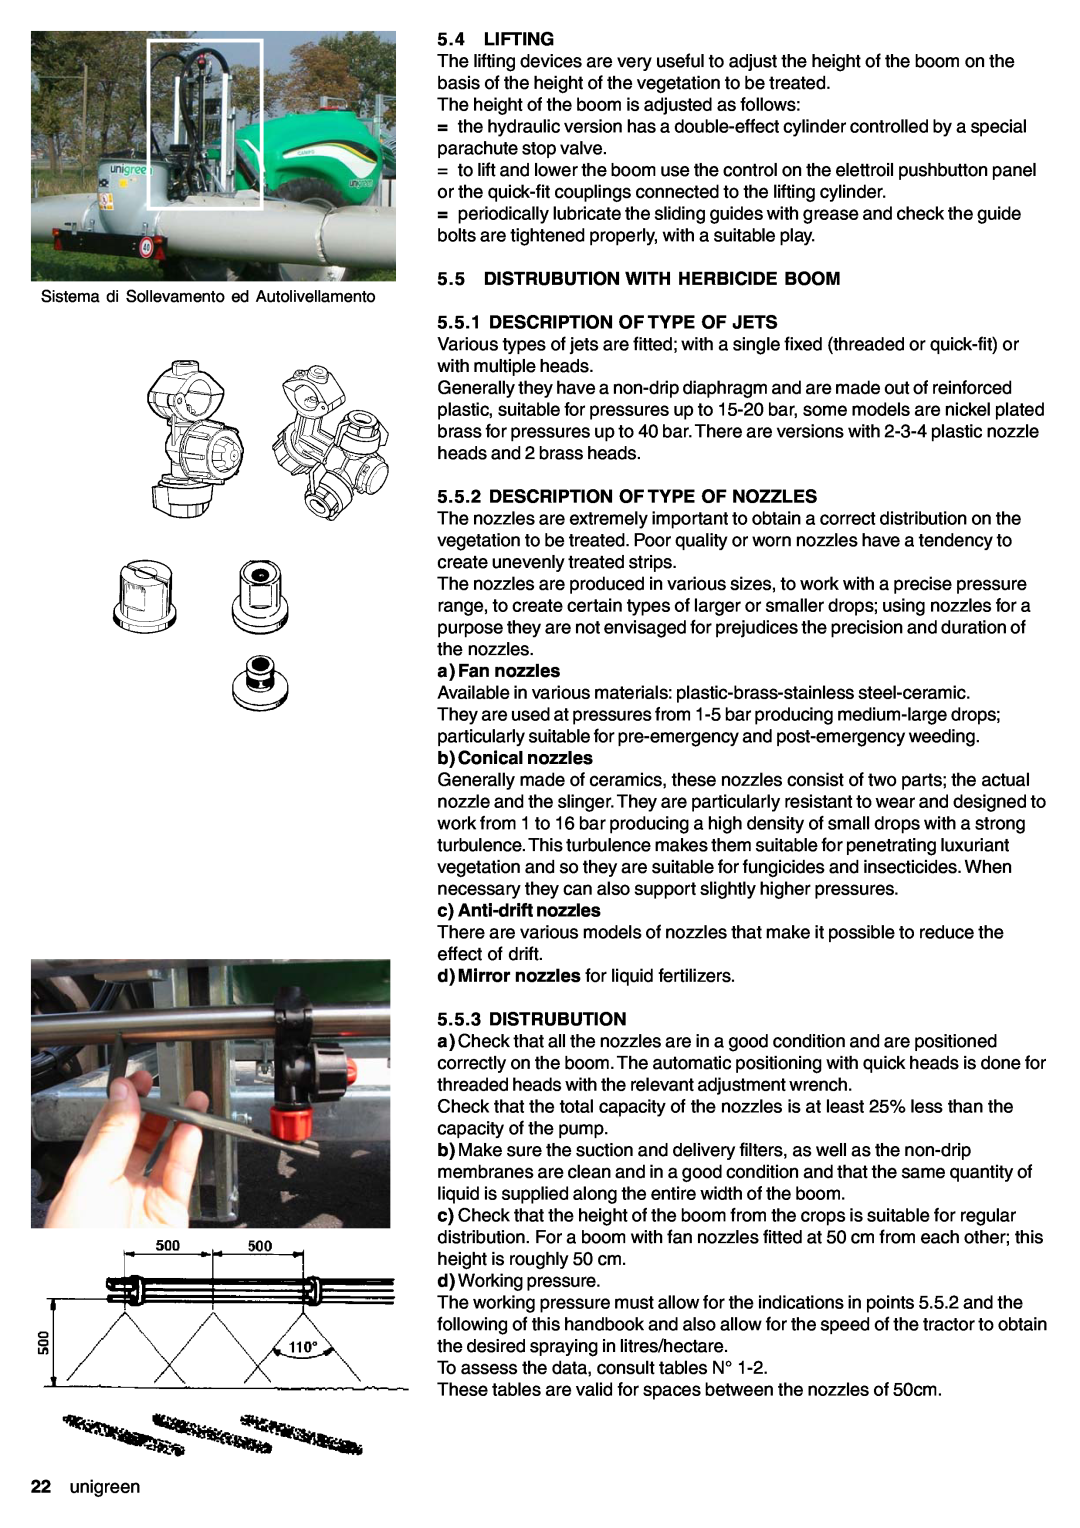 Unigreen 11 5.4LIFTING, 5.5DISTRUBUTION WITH HERBICIDE BOOM, Description Of Type Of Jets, Description Of Type Of Nozzles 